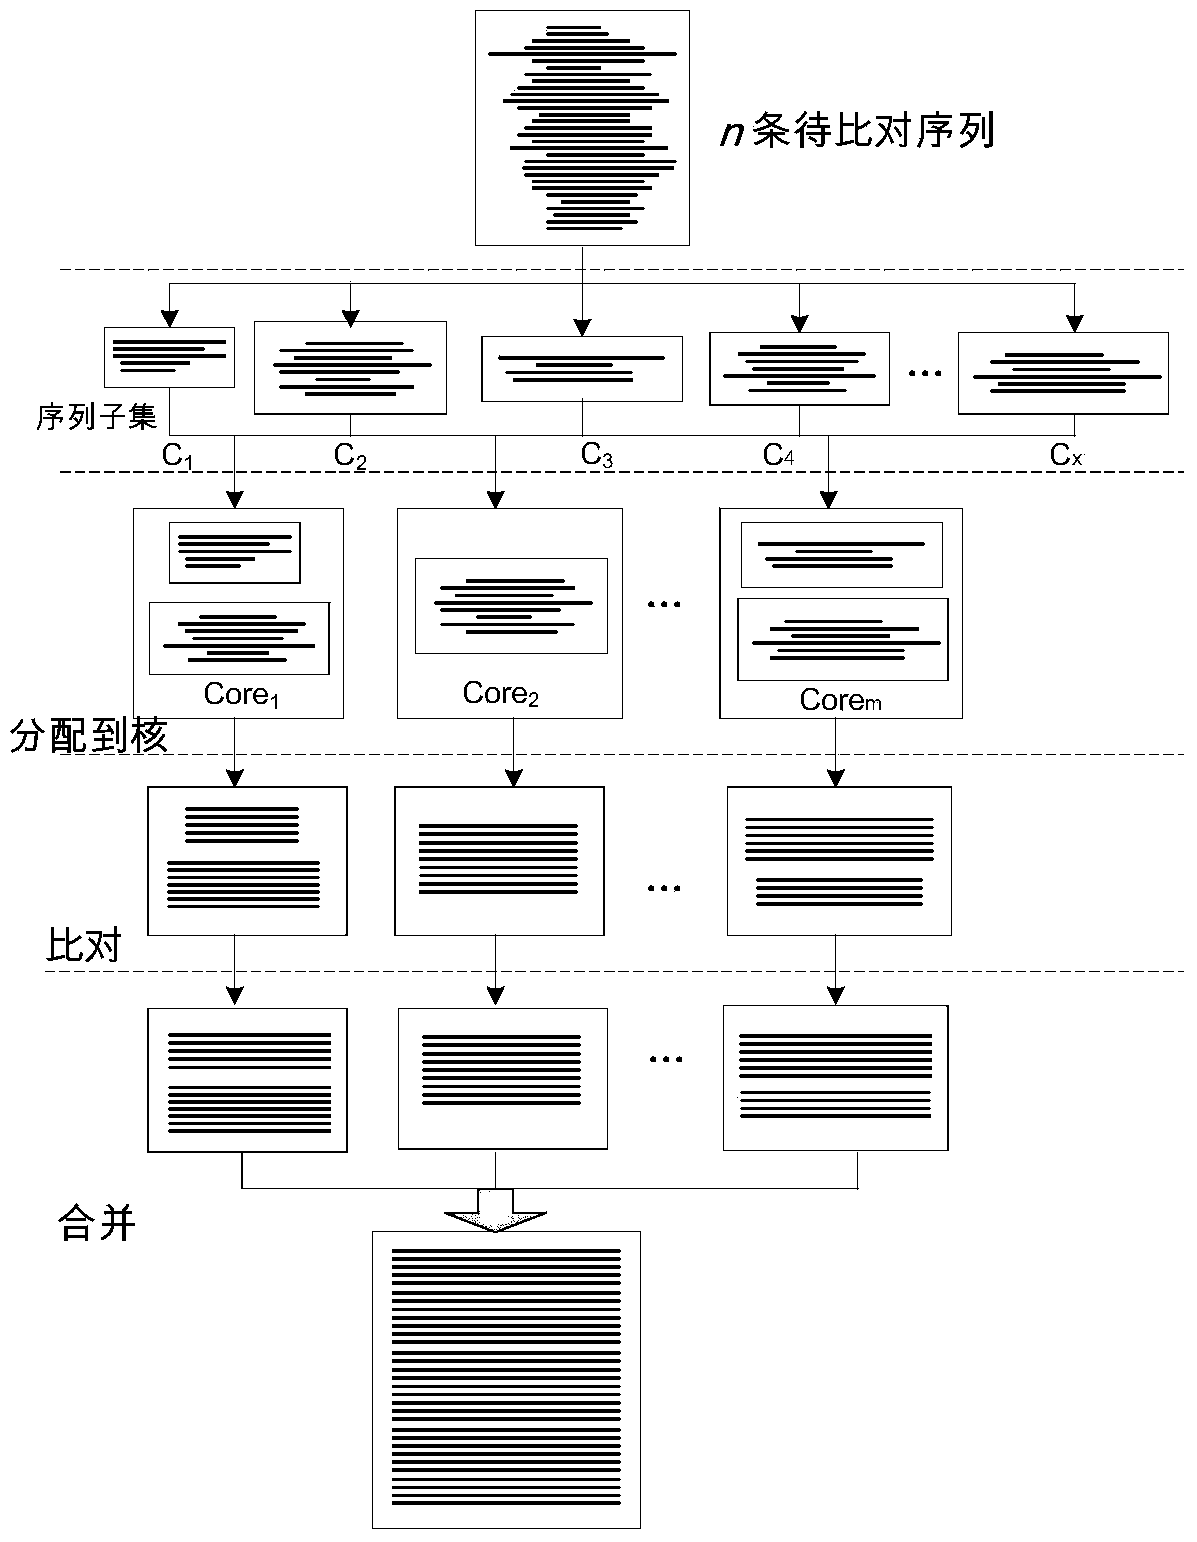 Parallel universal sequence alignment method running on multi-core computer platform